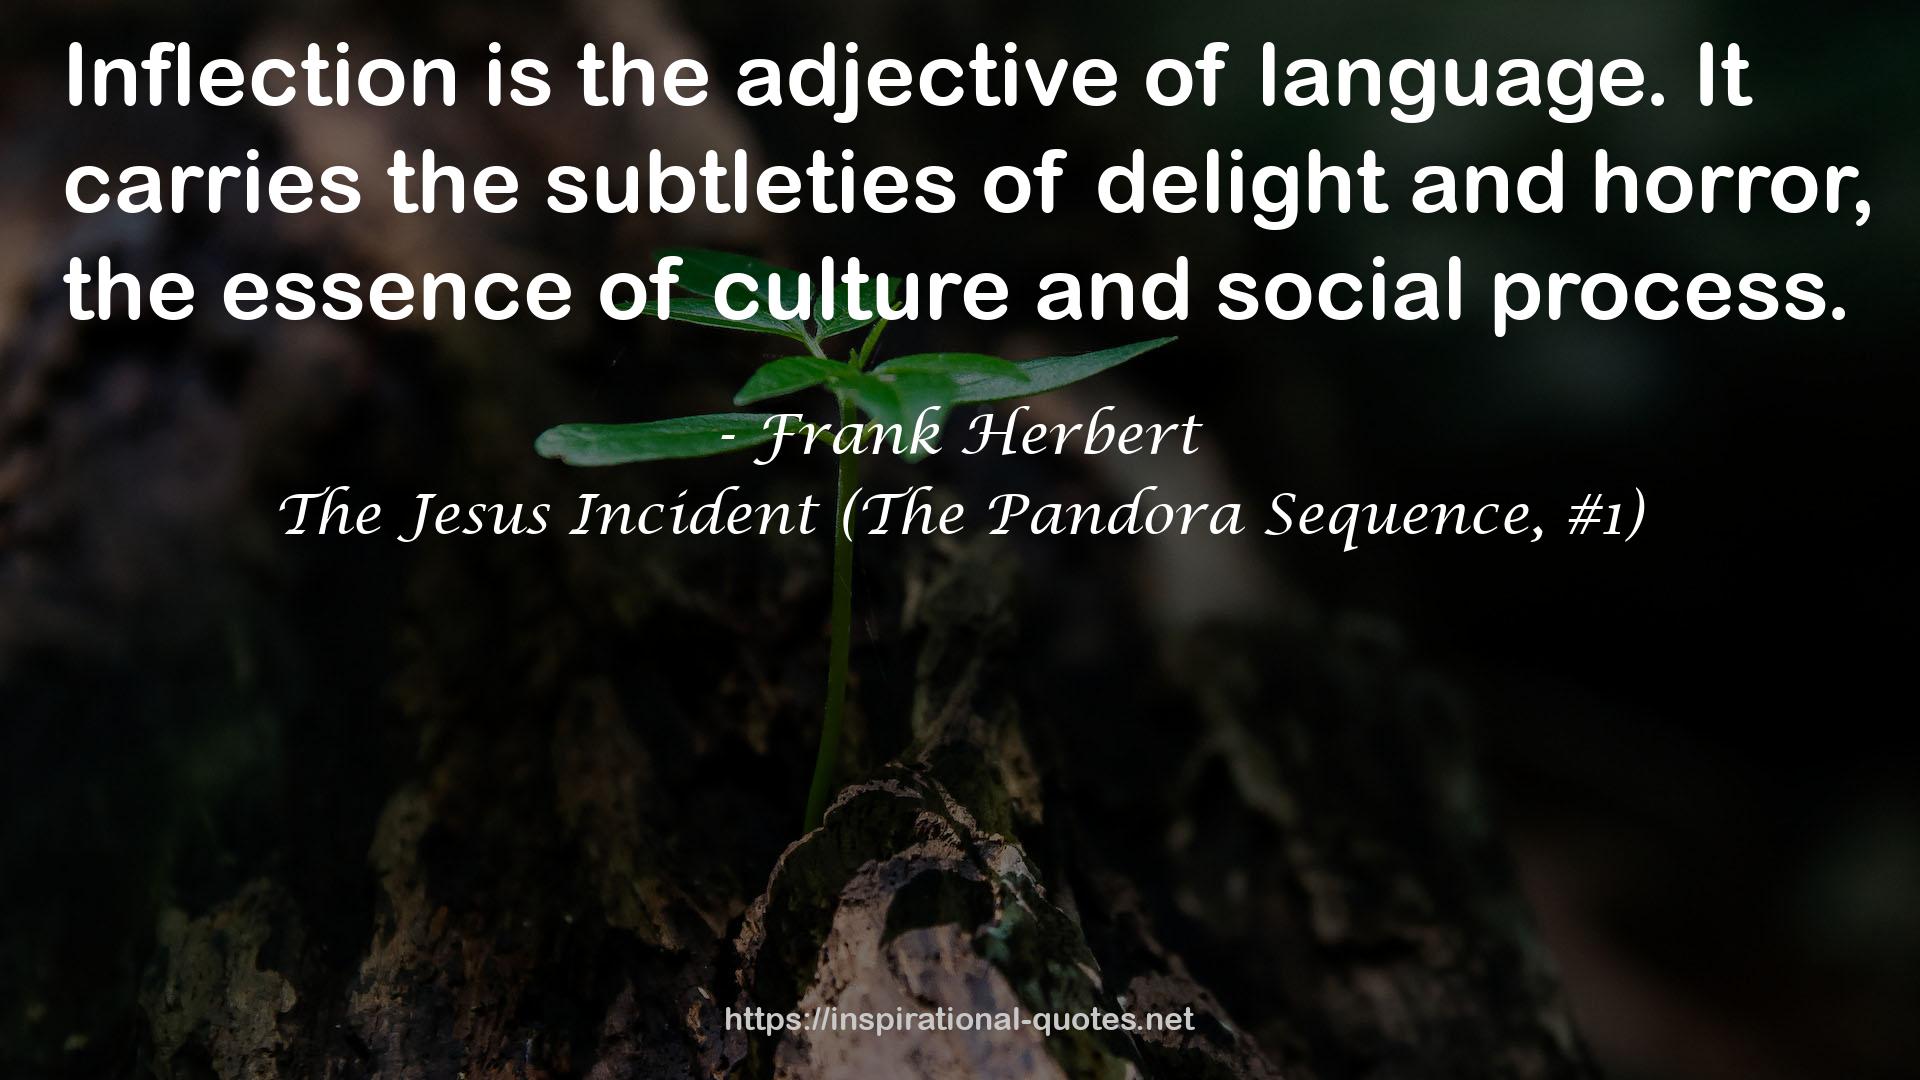 The Jesus Incident (The Pandora Sequence, #1) QUOTES